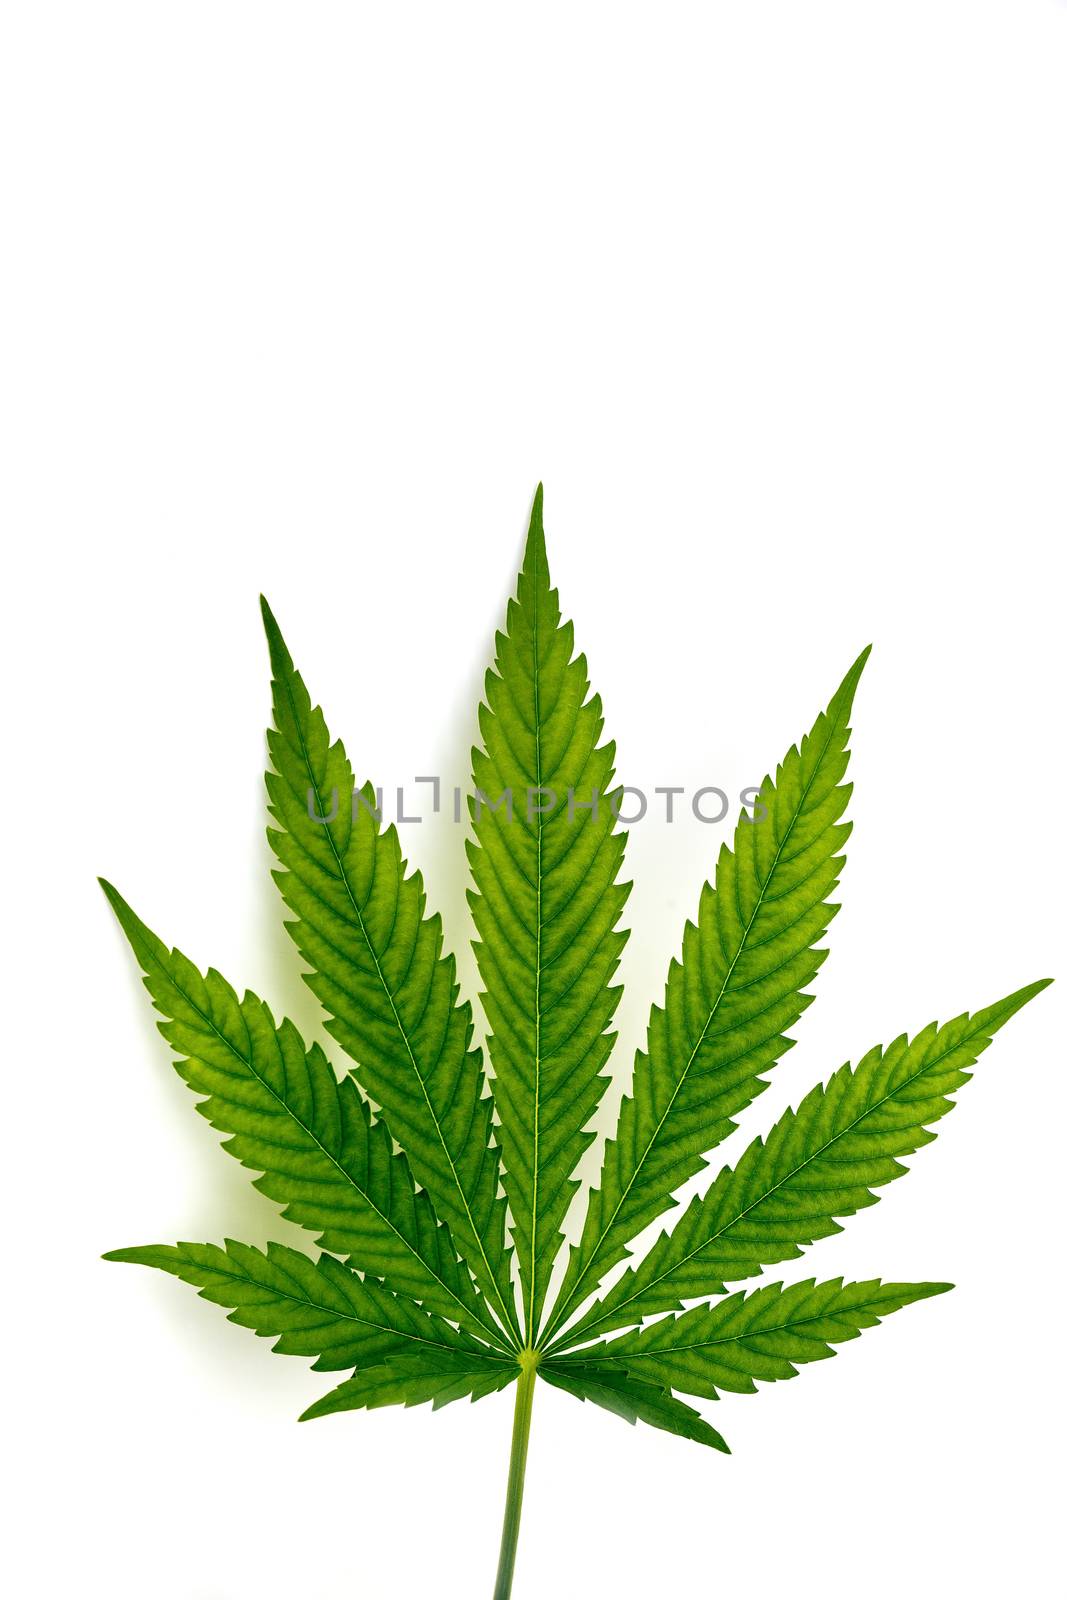 Leaf of cannabis plant isolated on white background